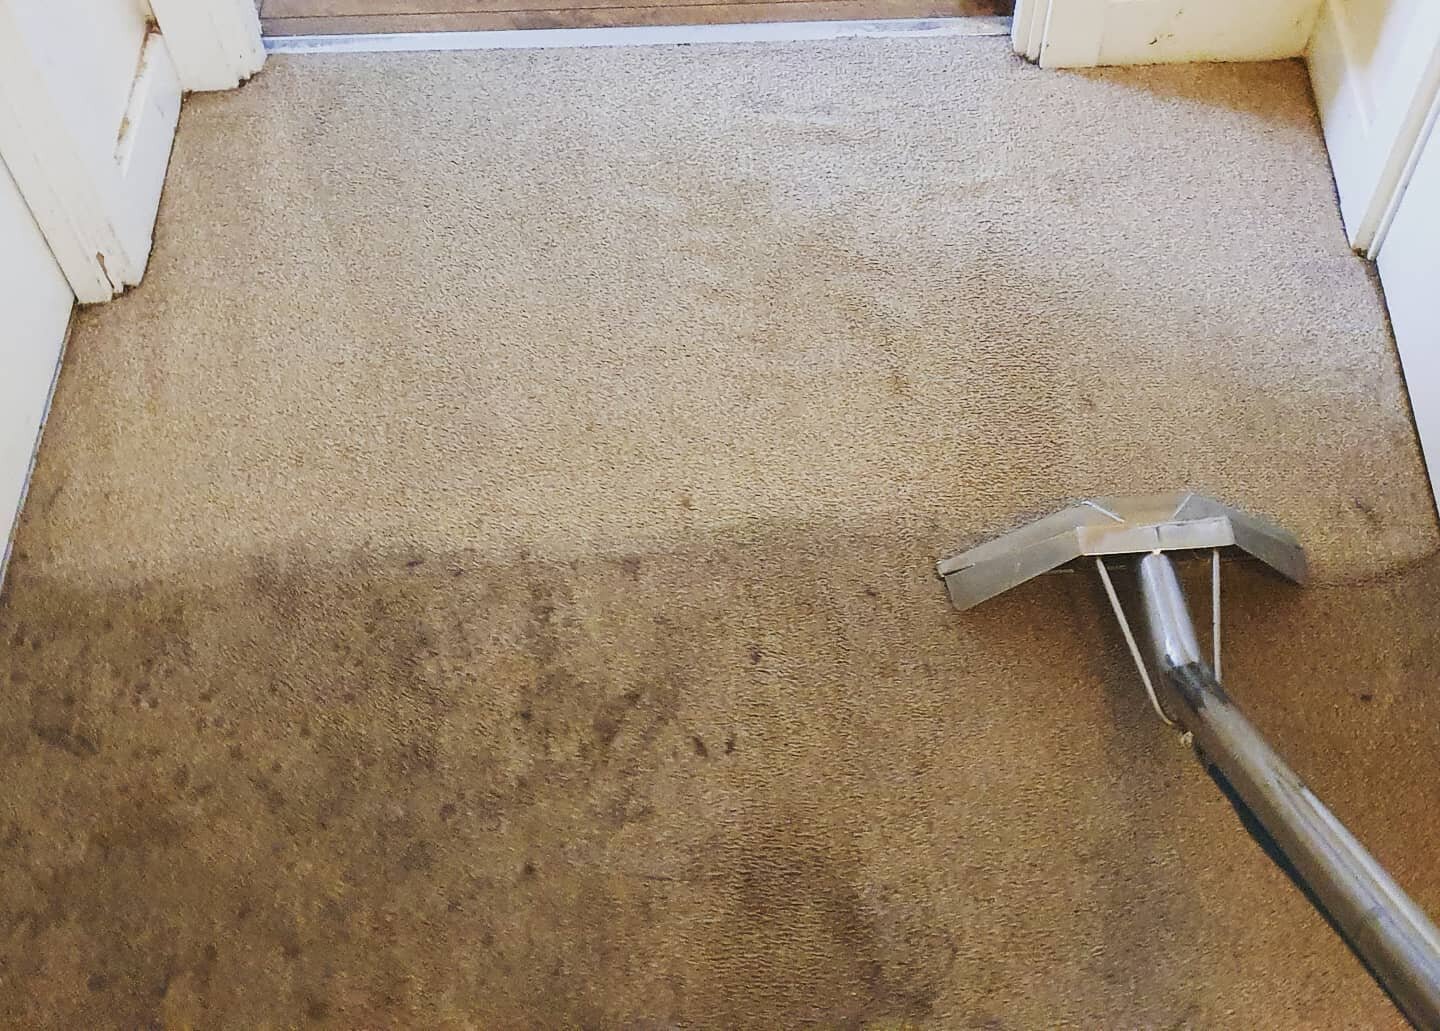 Huge transformation on this carpet today in Erith.